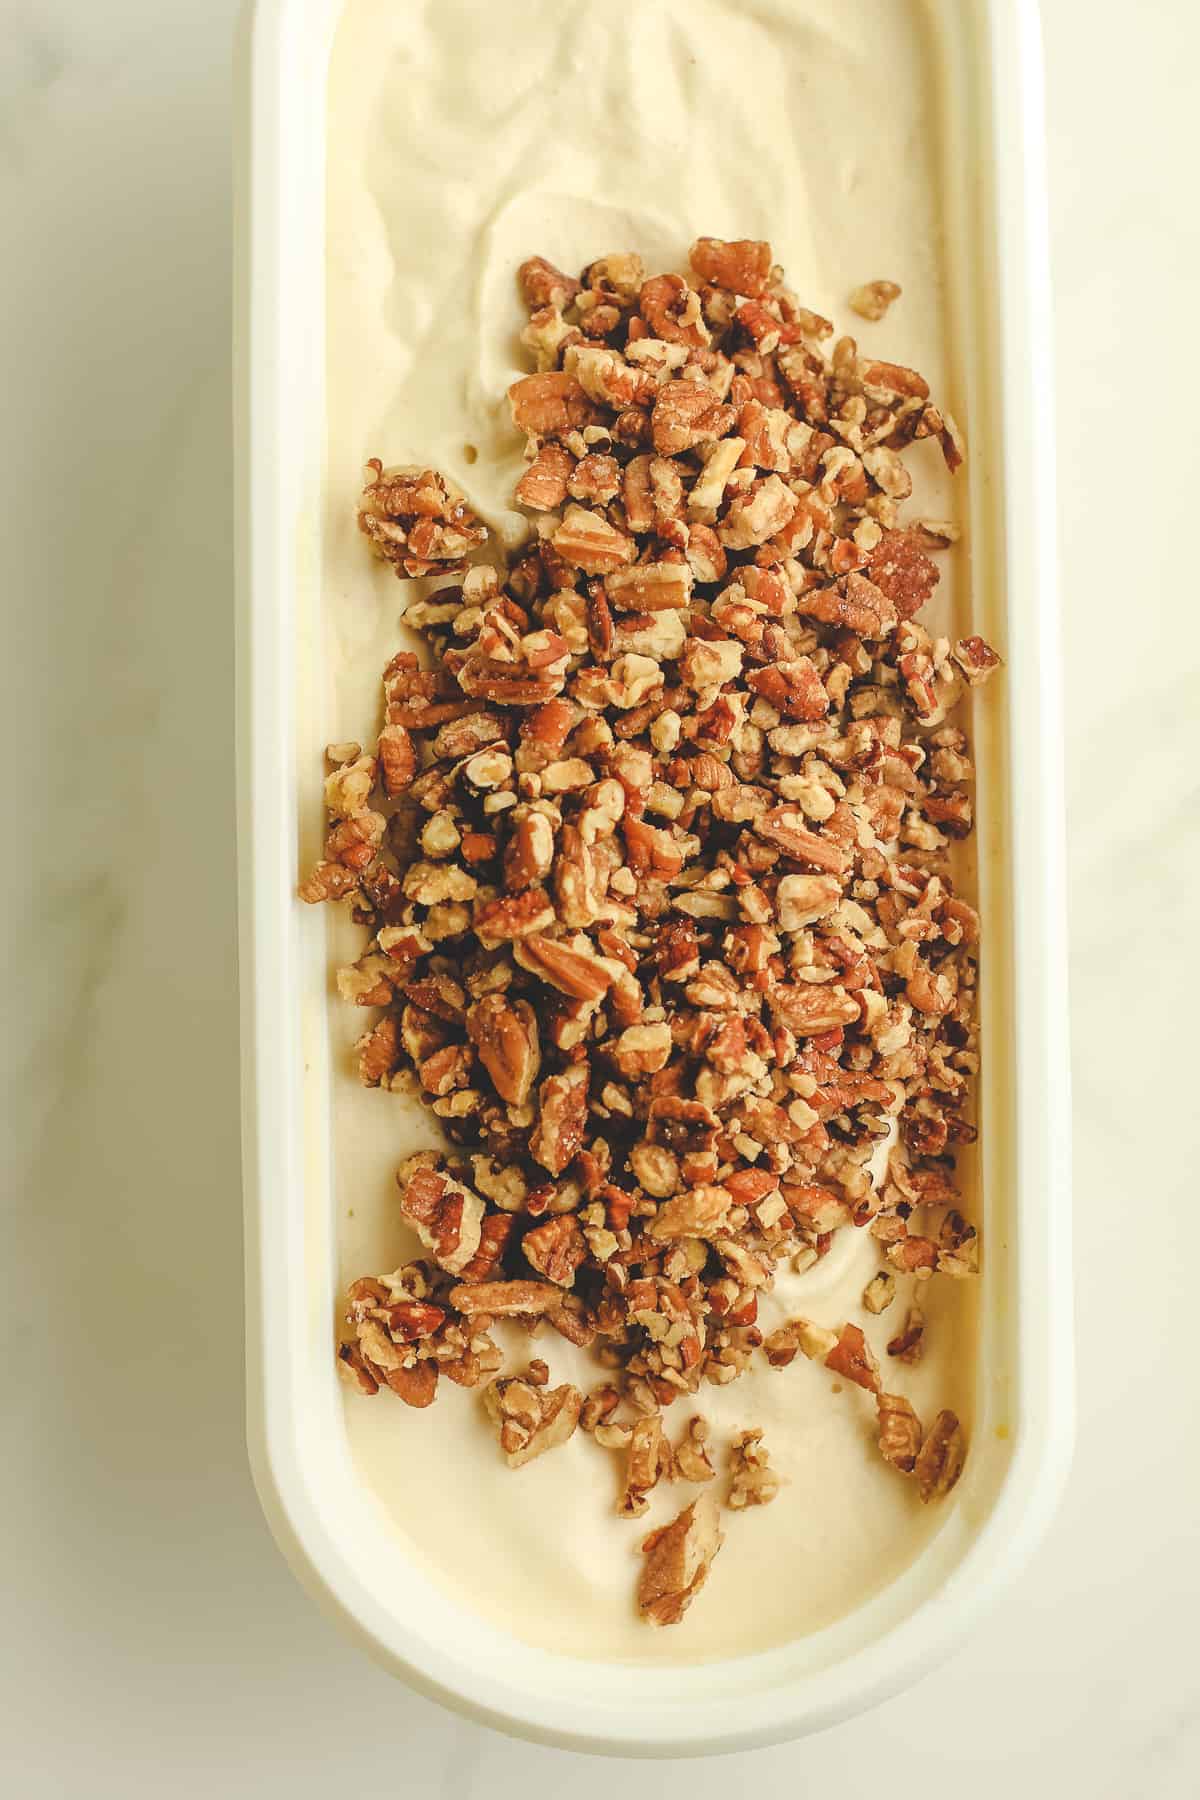 A container of pecan ice cream, with pecans on the top.